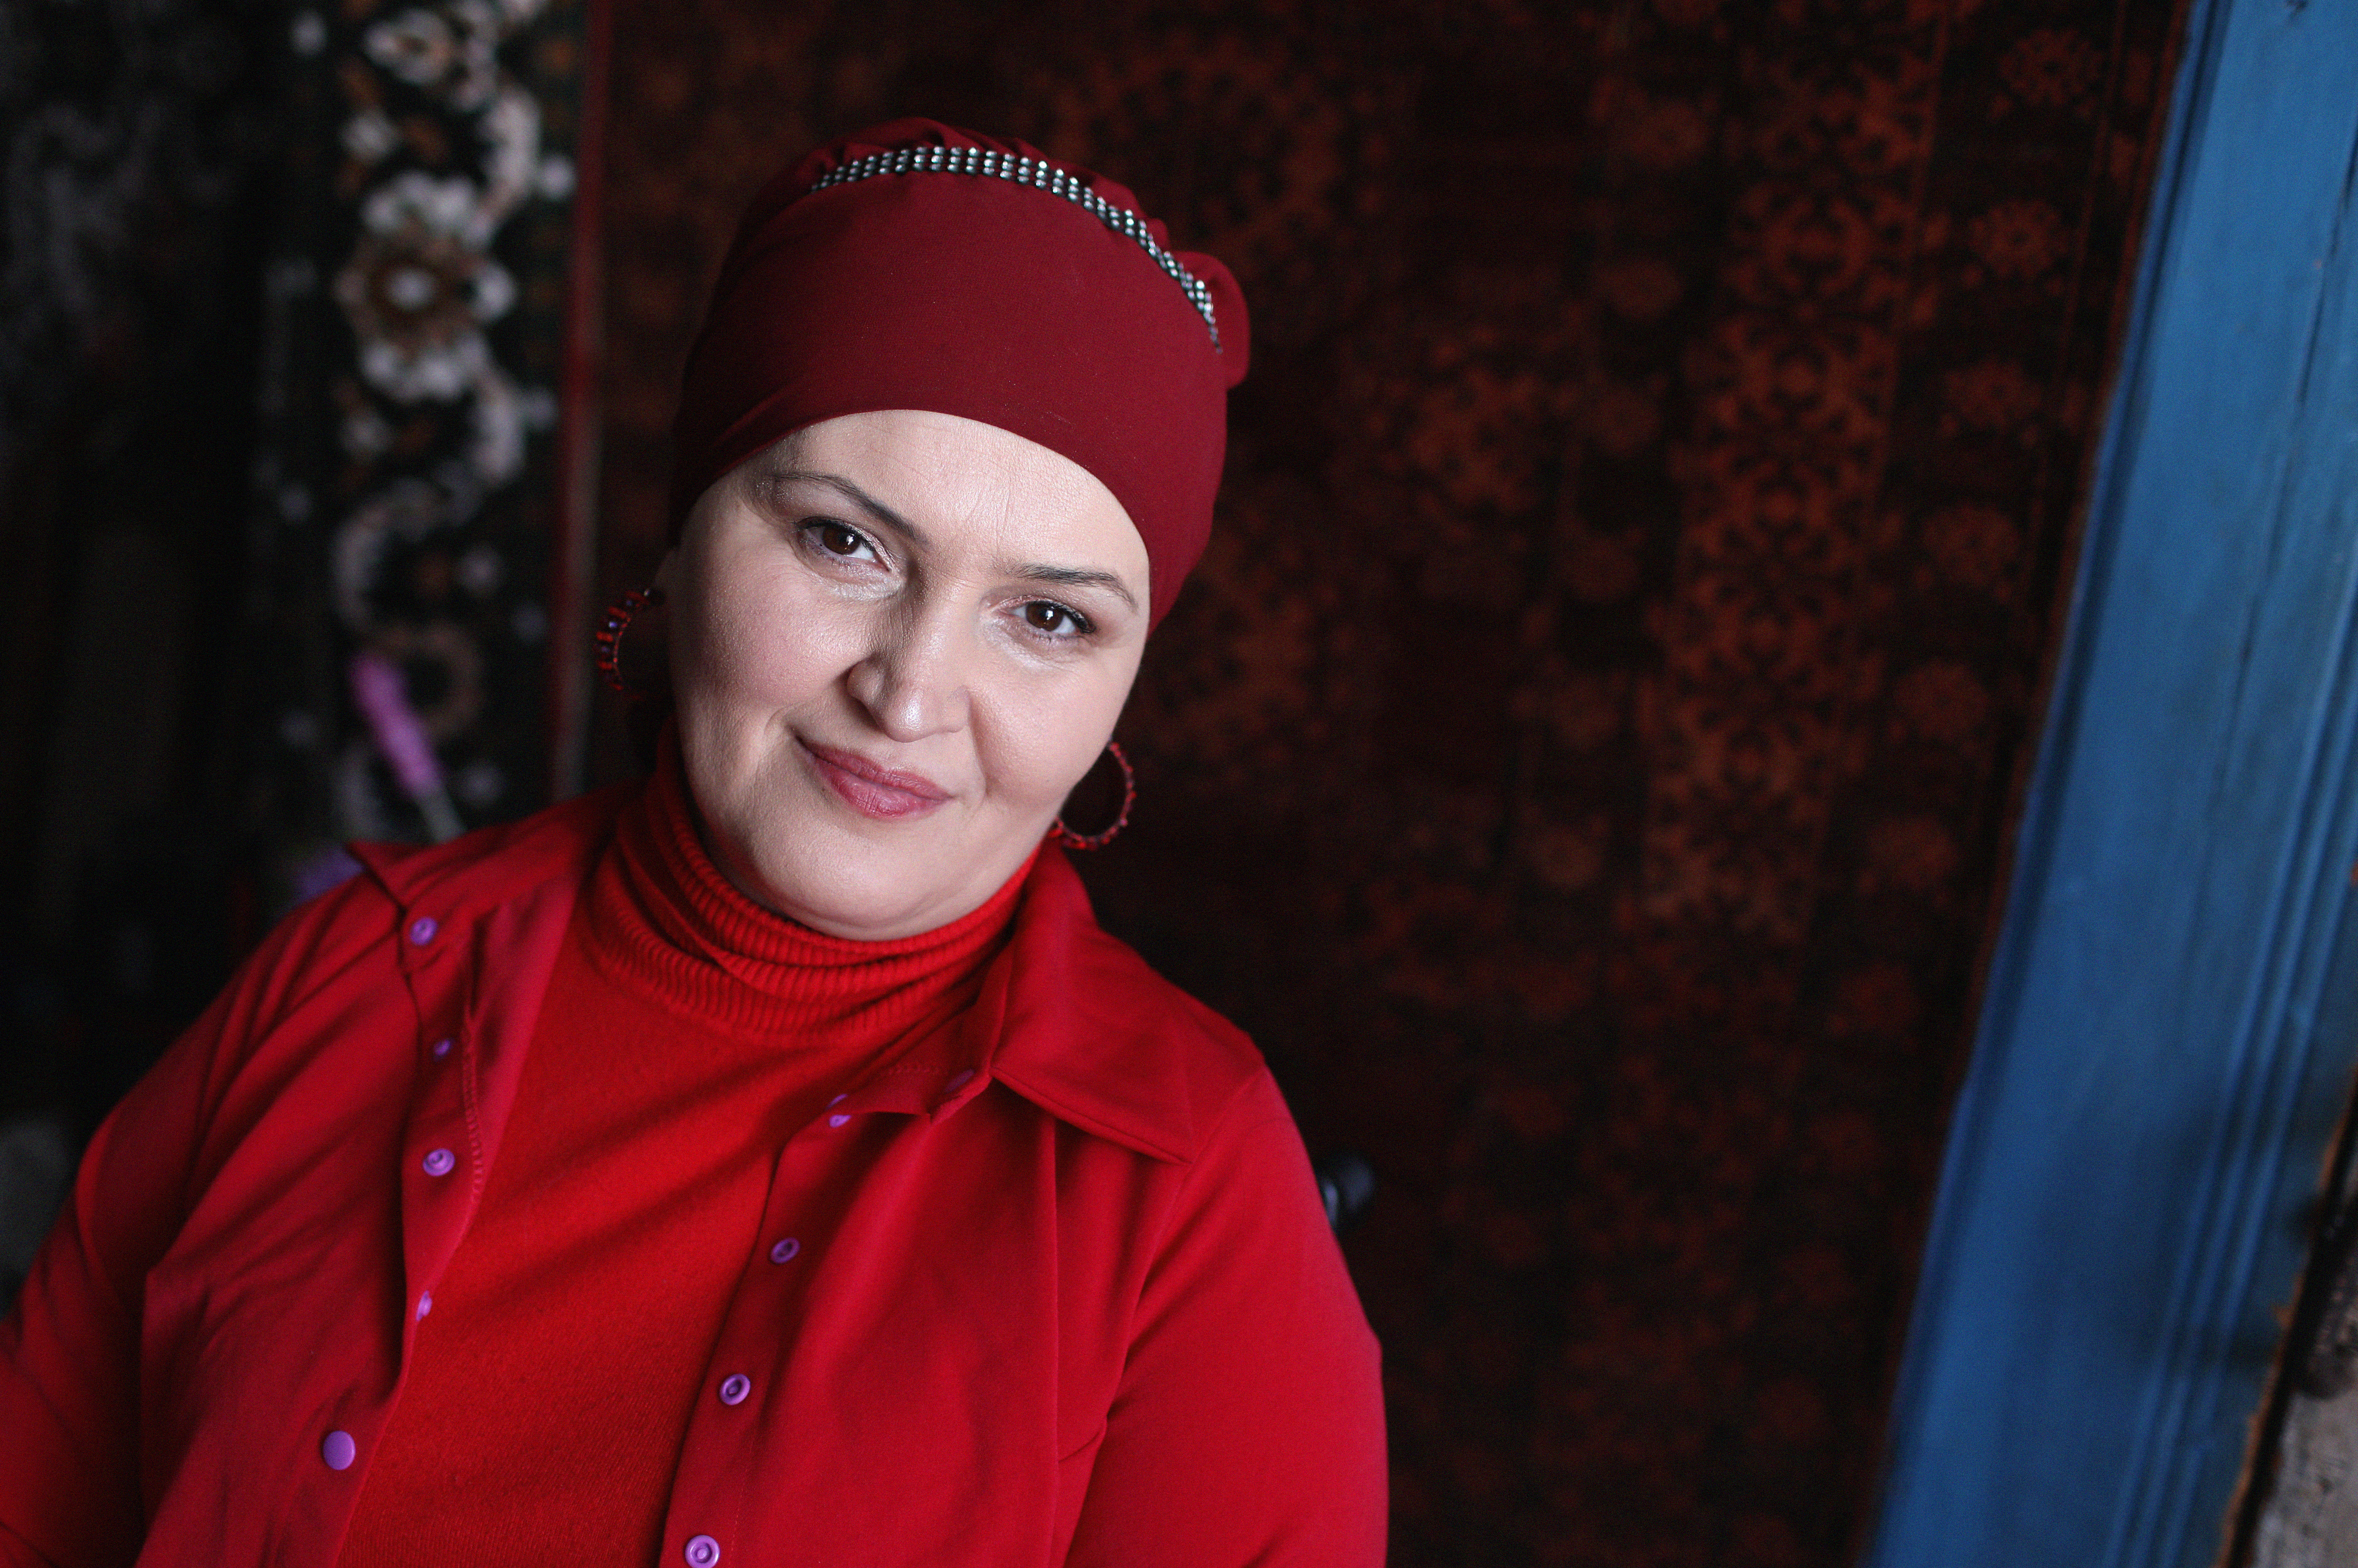 A woman, named Mzevinar Iremadze is wearing red closes and a red scarf on her head. 